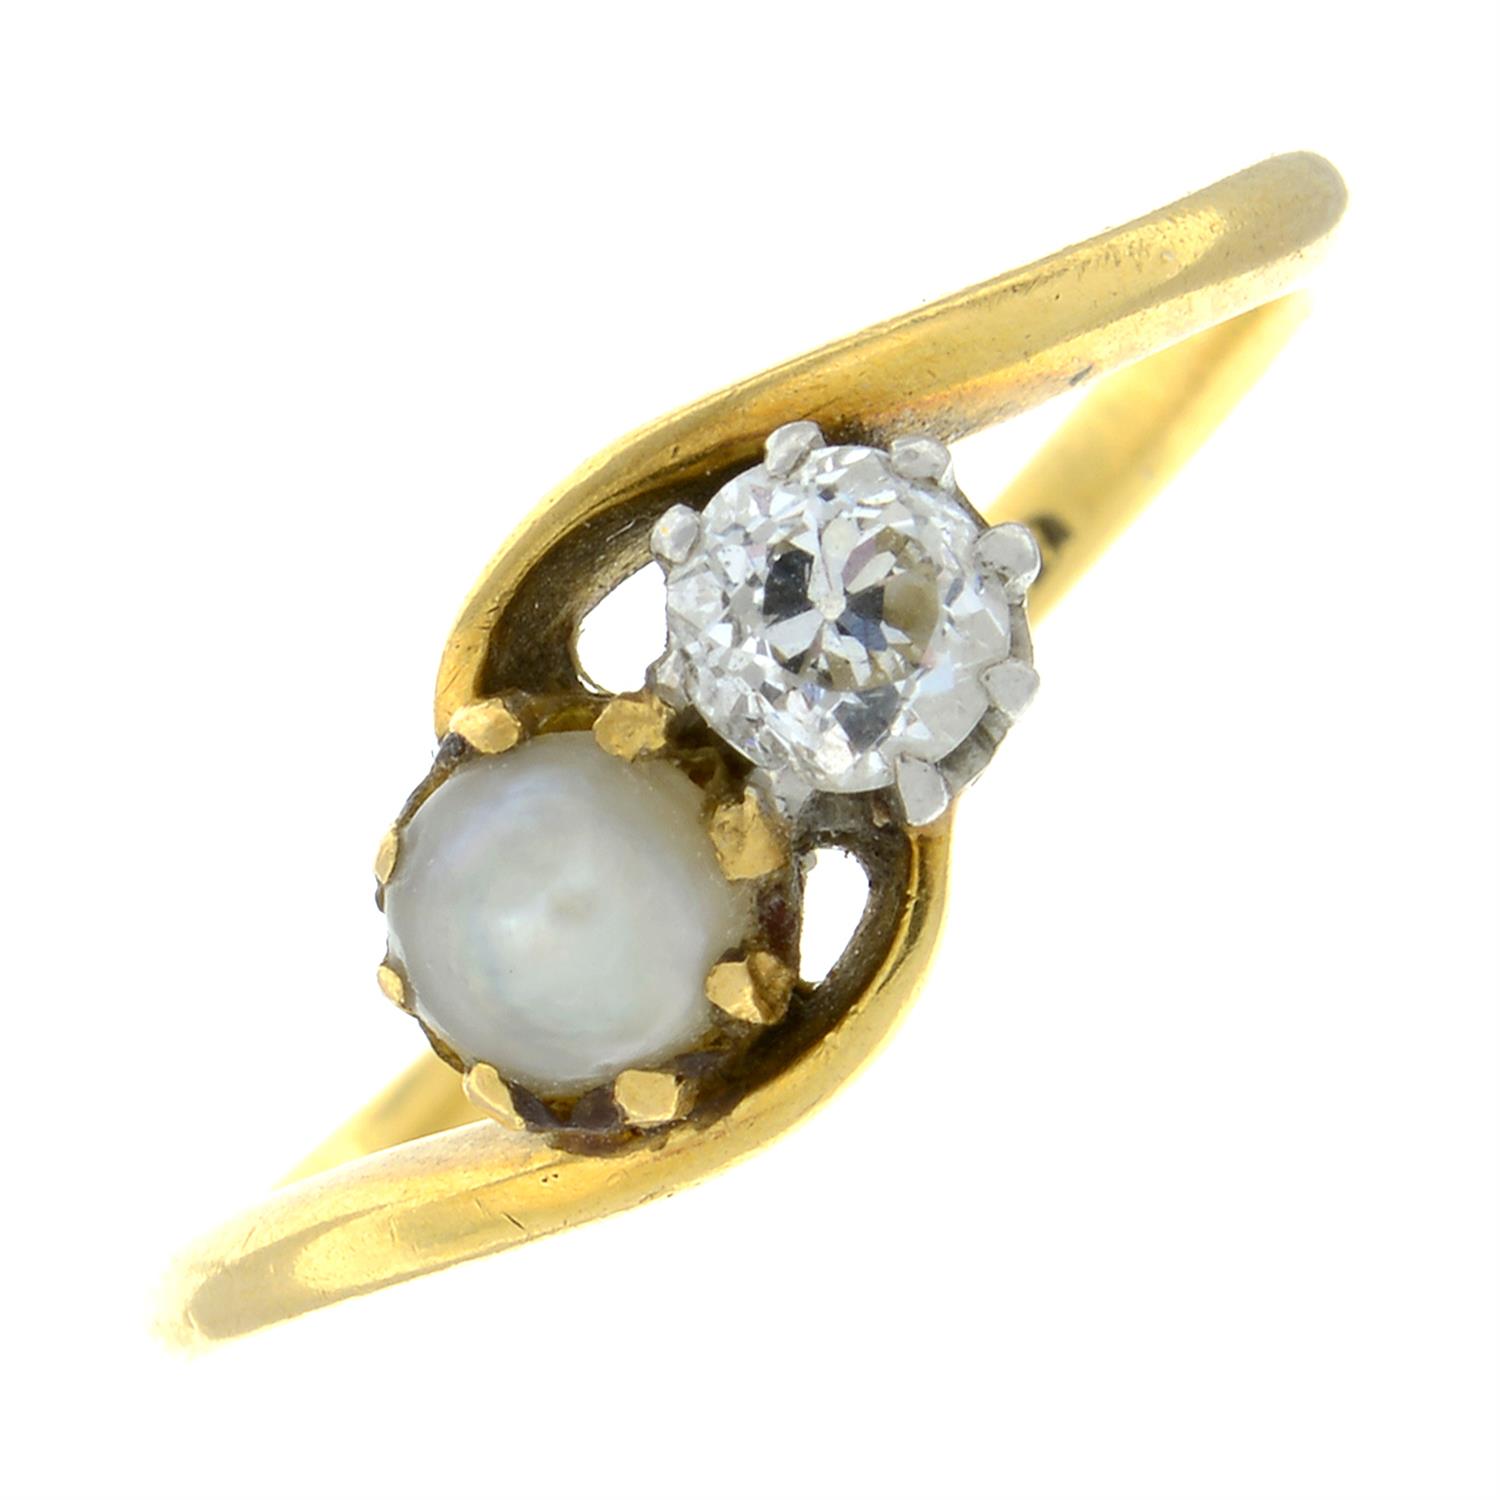 An early 20th century 18ct gold old-cut diamond and split pearl crossover ring.